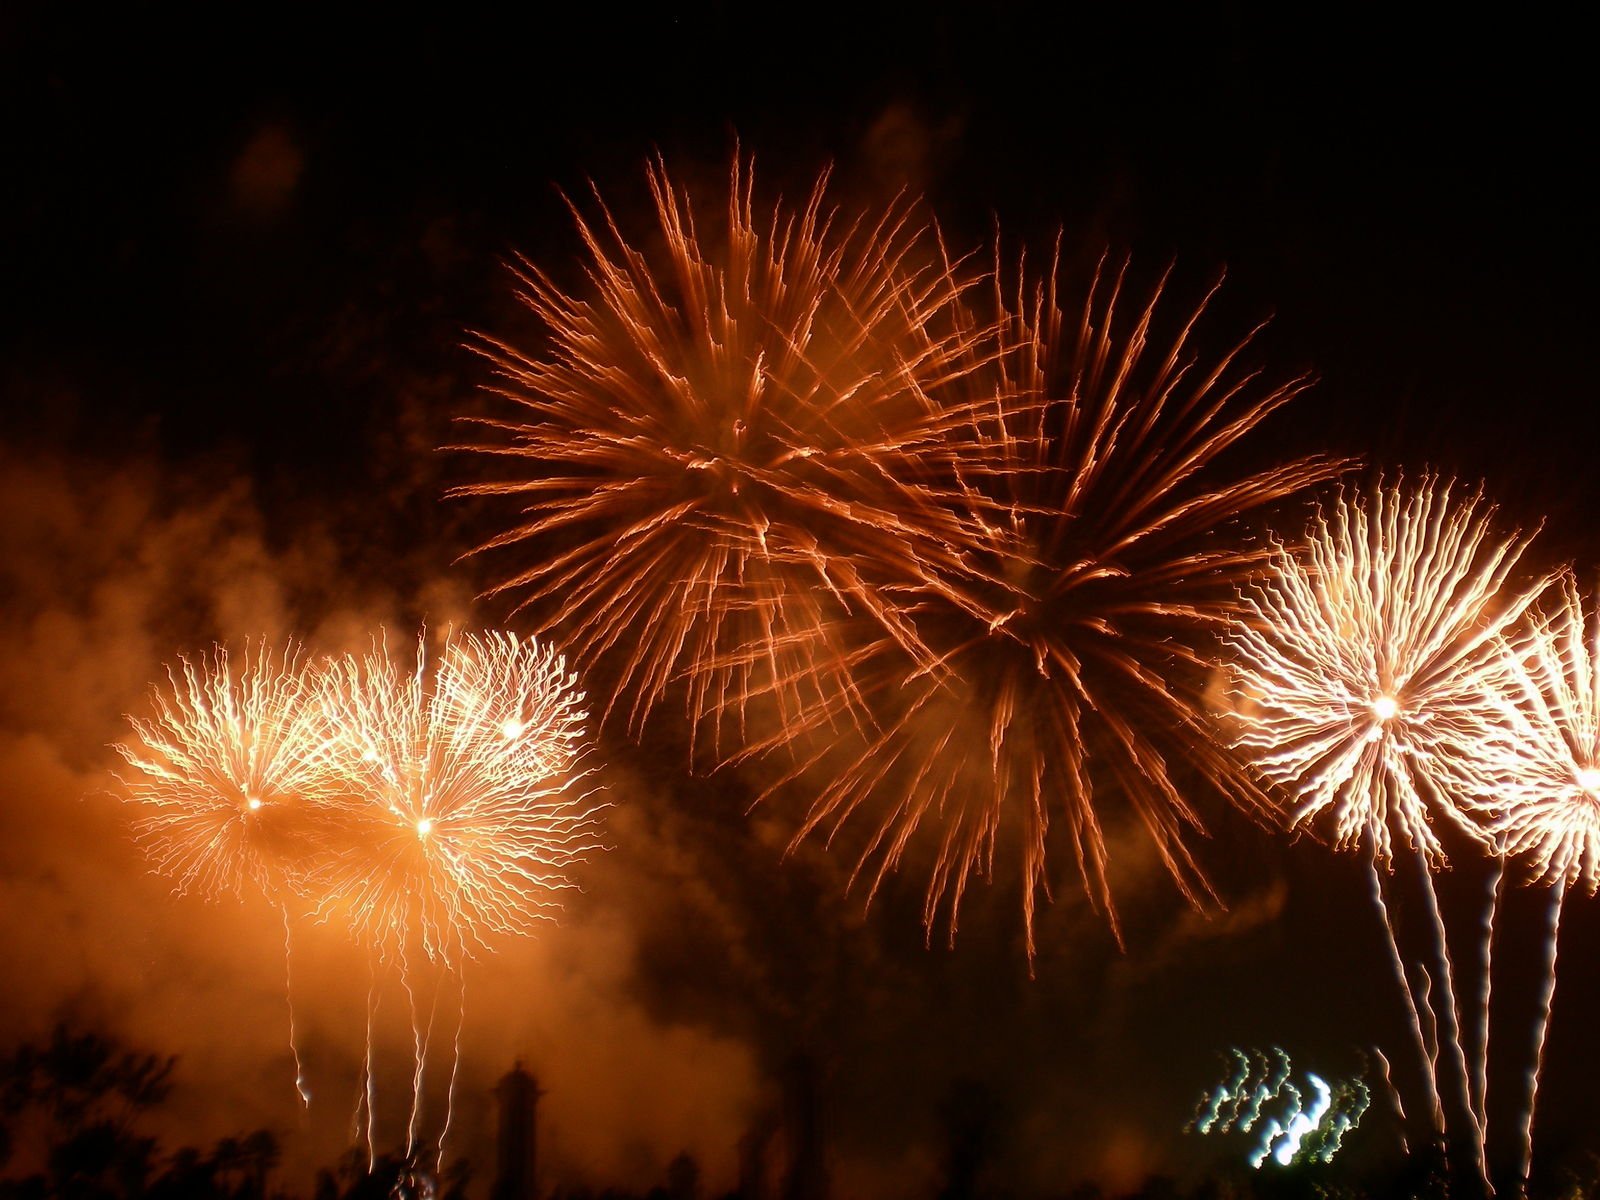 fireworks and fireworks explodes in the night sky